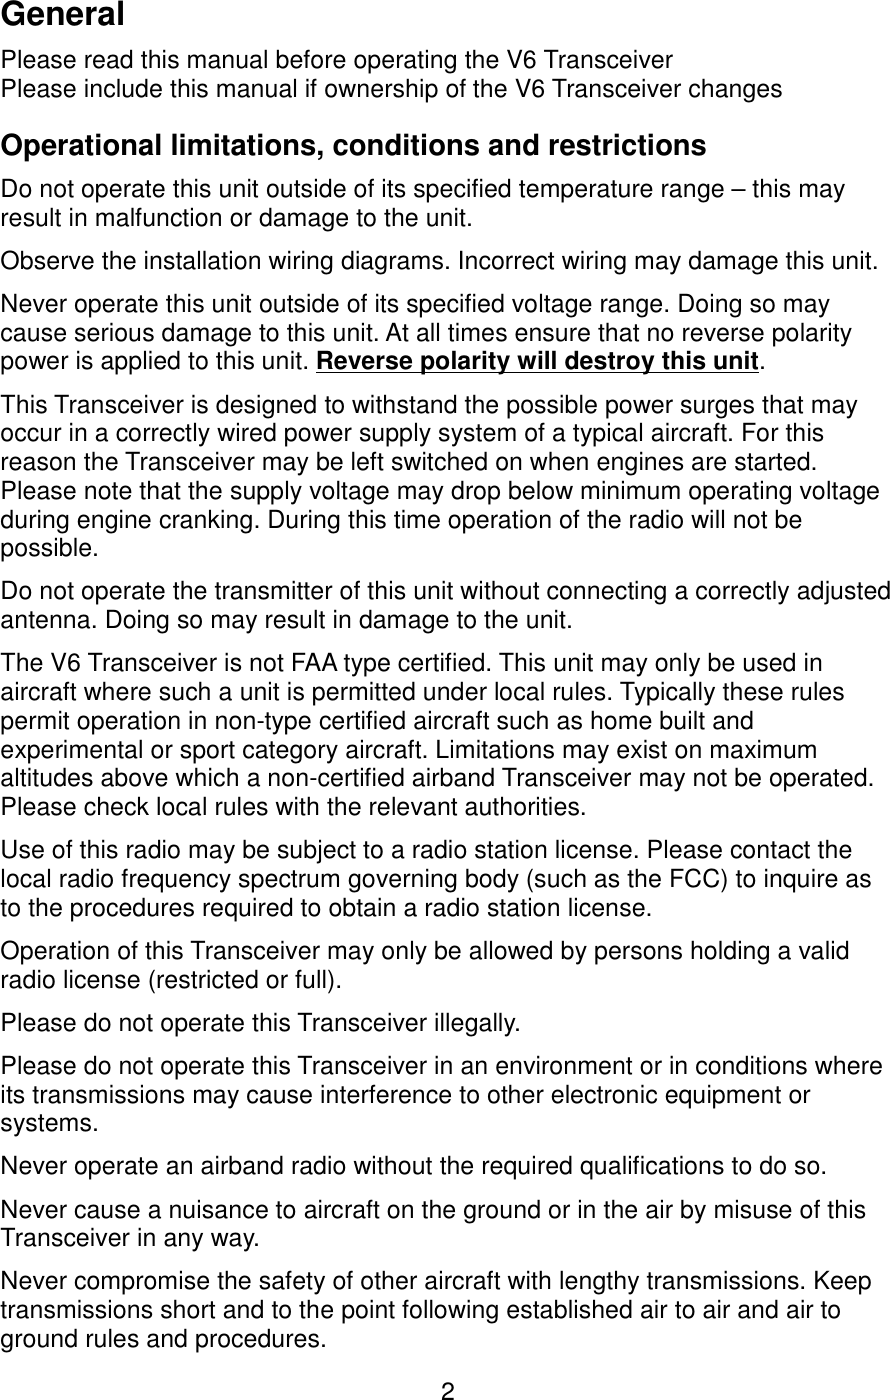 GeneralPlease read this manual before operating the V6 TransceiverPlease include this manual if ownership of the V6 Transceiver changesOperational limitations, conditions and restrictionsDo not operate this unit outside of its specified temperature range – this may result in malfunction or damage to the unit.Observe the installation wiring diagrams. Incorrect wiring may damage this unit.Never operate this unit outside of its specified voltage range. Doing so may cause serious damage to this unit. At all times ensure that no reverse polarity power is applied to this unit. Reverse polarity will destroy this unit.This Transceiver is designed to withstand the possible power surges that may occur in a correctly wired power supply system of a typical aircraft. For this reason the Transceiver may be left switched on when engines are started. Please note that the supply voltage may drop below minimum operating voltage during engine cranking. During this time operation of the radio will not be possible.Do not operate the transmitter of this unit without connecting a correctly adjusted antenna. Doing so may result in damage to the unit.The V6 Transceiver is not FAA type certified. This unit may only be used in aircraft where such a unit is permitted under local rules. Typically these rules permit operation in non-type certified aircraft such as home built and experimental or sport category aircraft. Limitations may exist on maximum altitudes above which a non-certified airband Transceiver may not be operated. Please check local rules with the relevant authorities.Use of this radio may be subject to a radio station license. Please contact the local radio frequency spectrum governing body (such as the FCC) to inquire as to the procedures required to obtain a radio station license.Operation of this Transceiver may only be allowed by persons holding a valid radio license (restricted or full).Please do not operate this Transceiver illegally.Please do not operate this Transceiver in an environment or in conditions where its transmissions may cause interference to other electronic equipment or systems.Never operate an airband radio without the required qualifications to do so.Never cause a nuisance to aircraft on the ground or in the air by misuse of this Transceiver in any way.Never compromise the safety of other aircraft with lengthy transmissions. Keep transmissions short and to the point following established air to air and air to ground rules and procedures.2